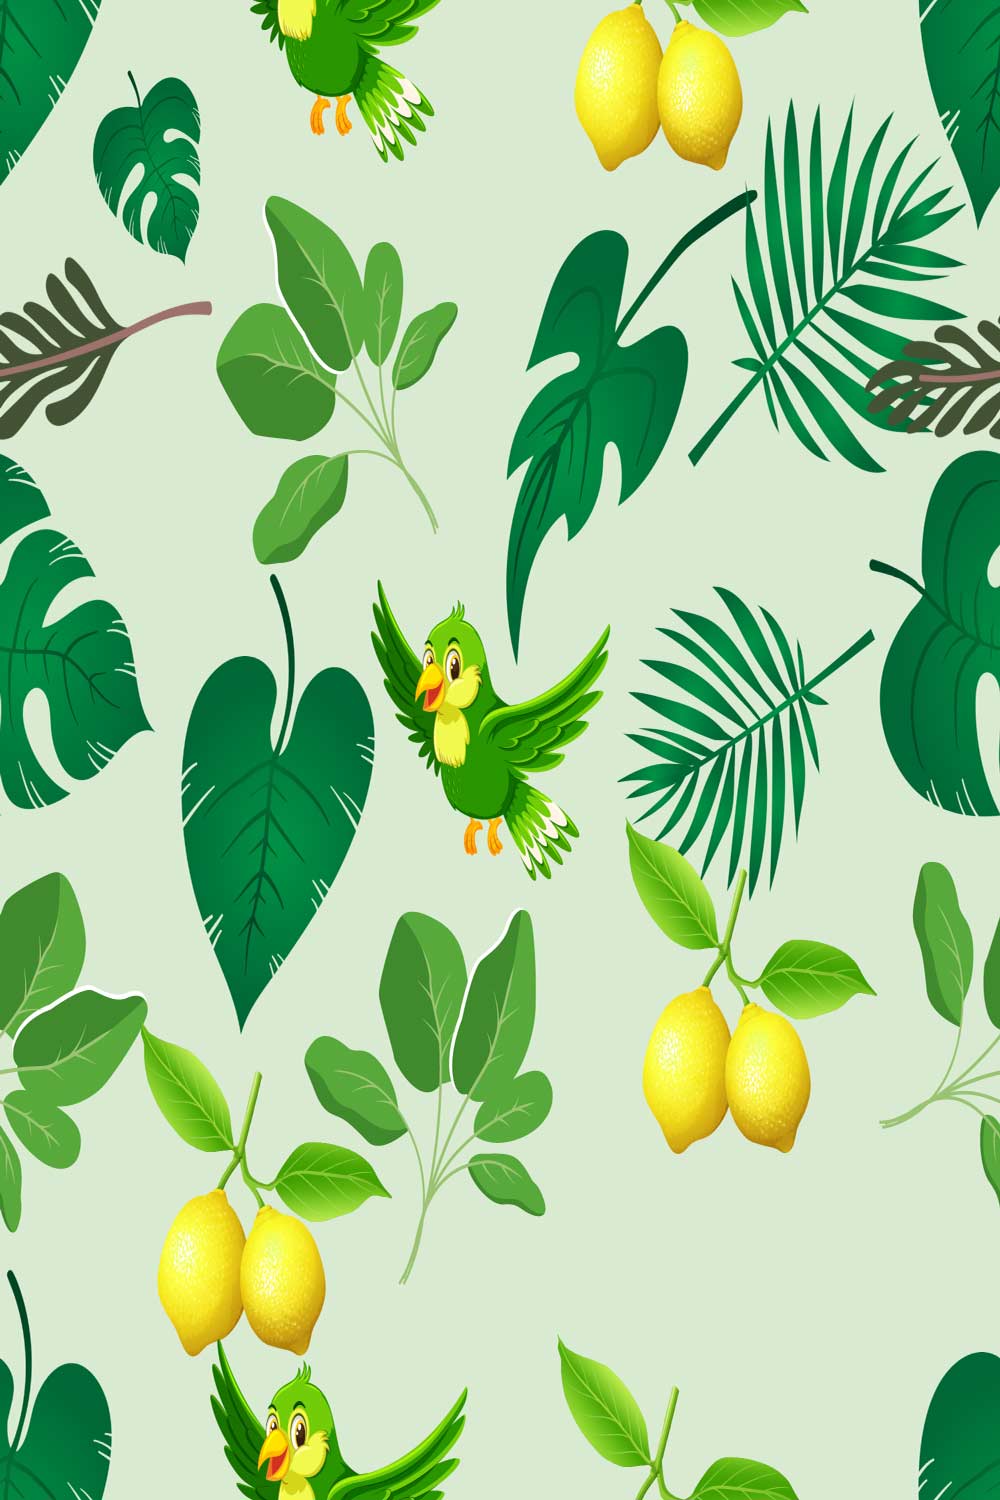 Pattern Design with parrots in the background pinterest preview image.